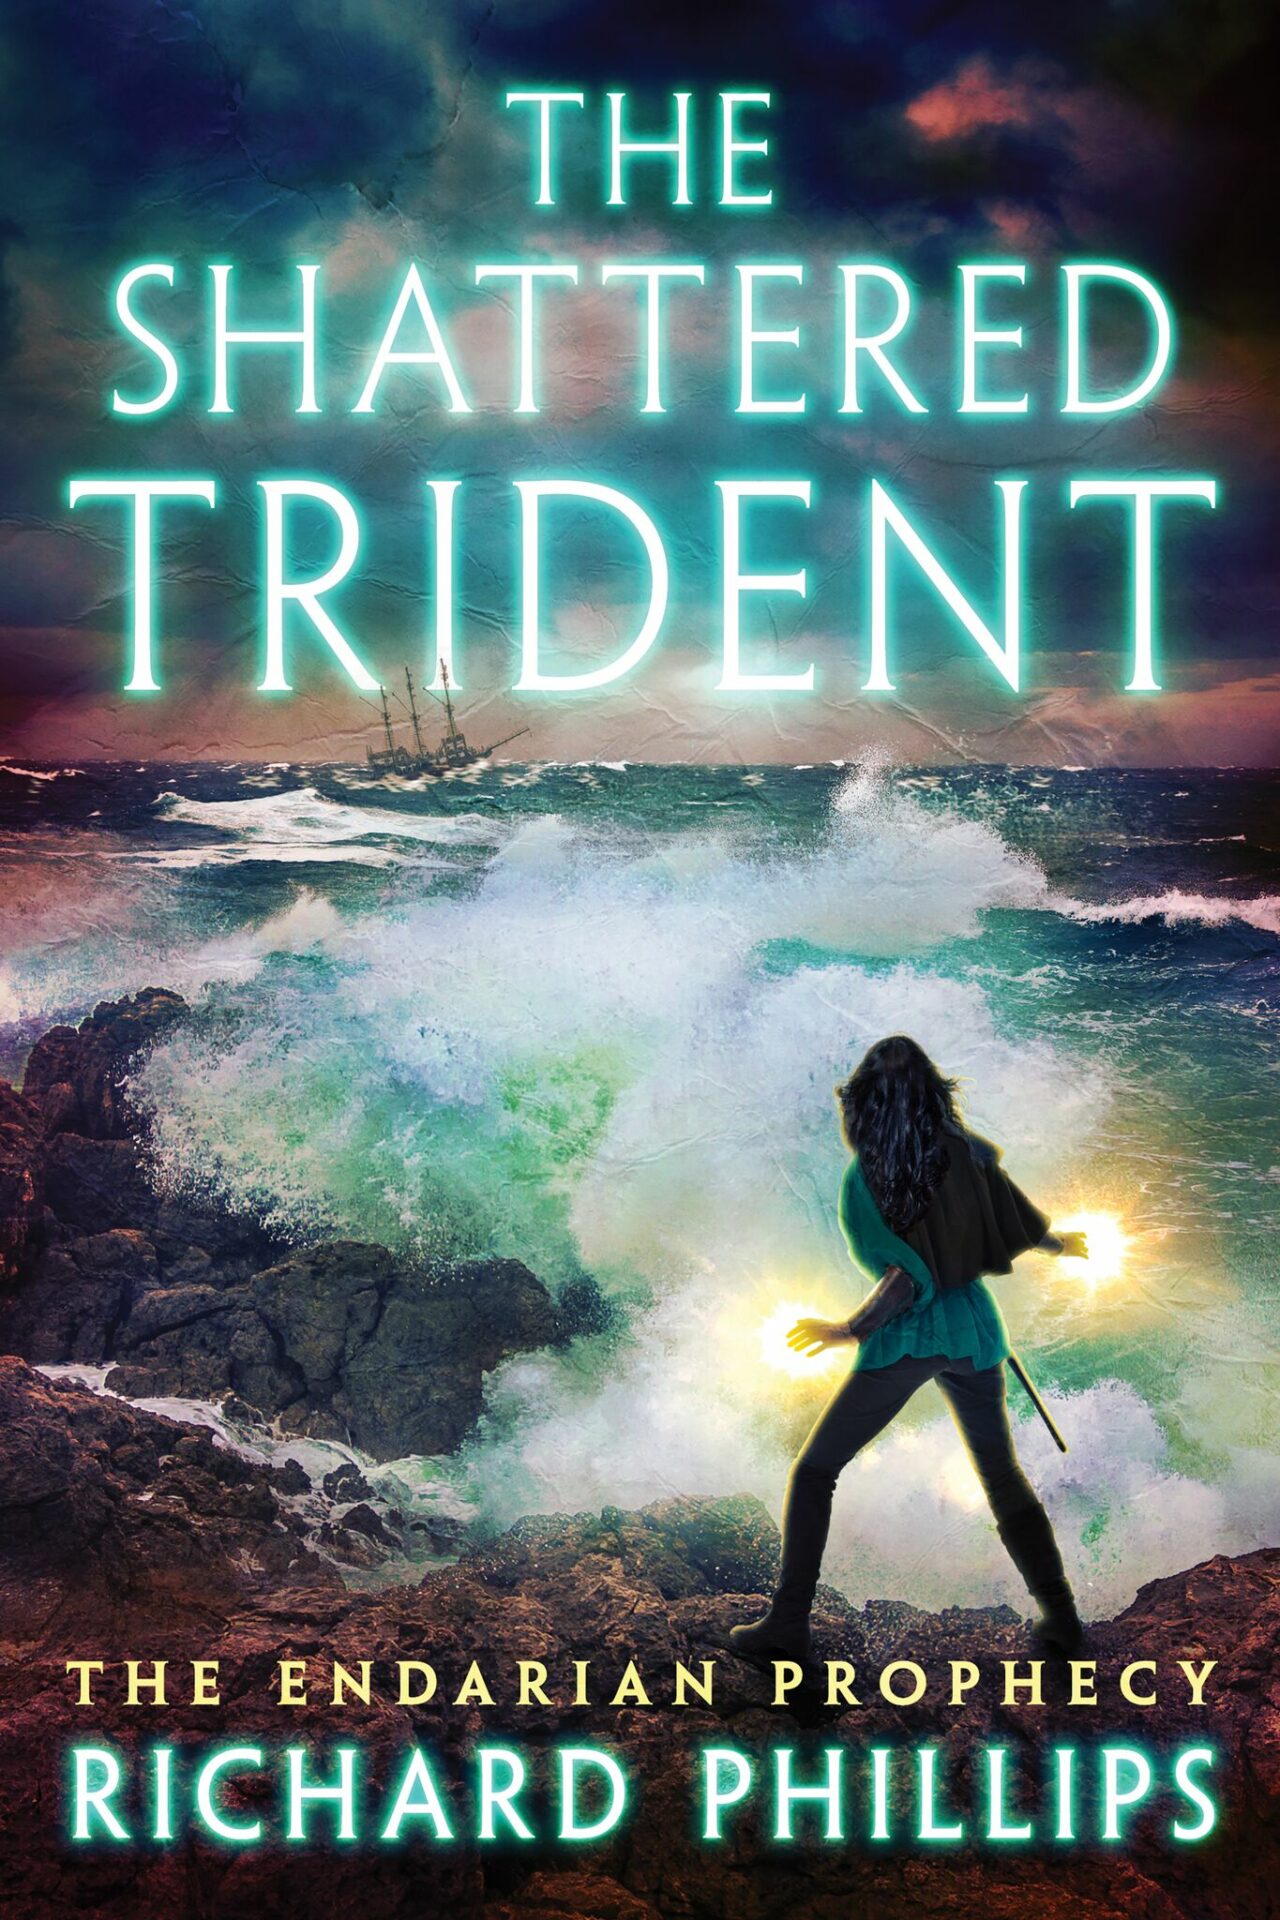 Shattered Trident by Richard Phillips